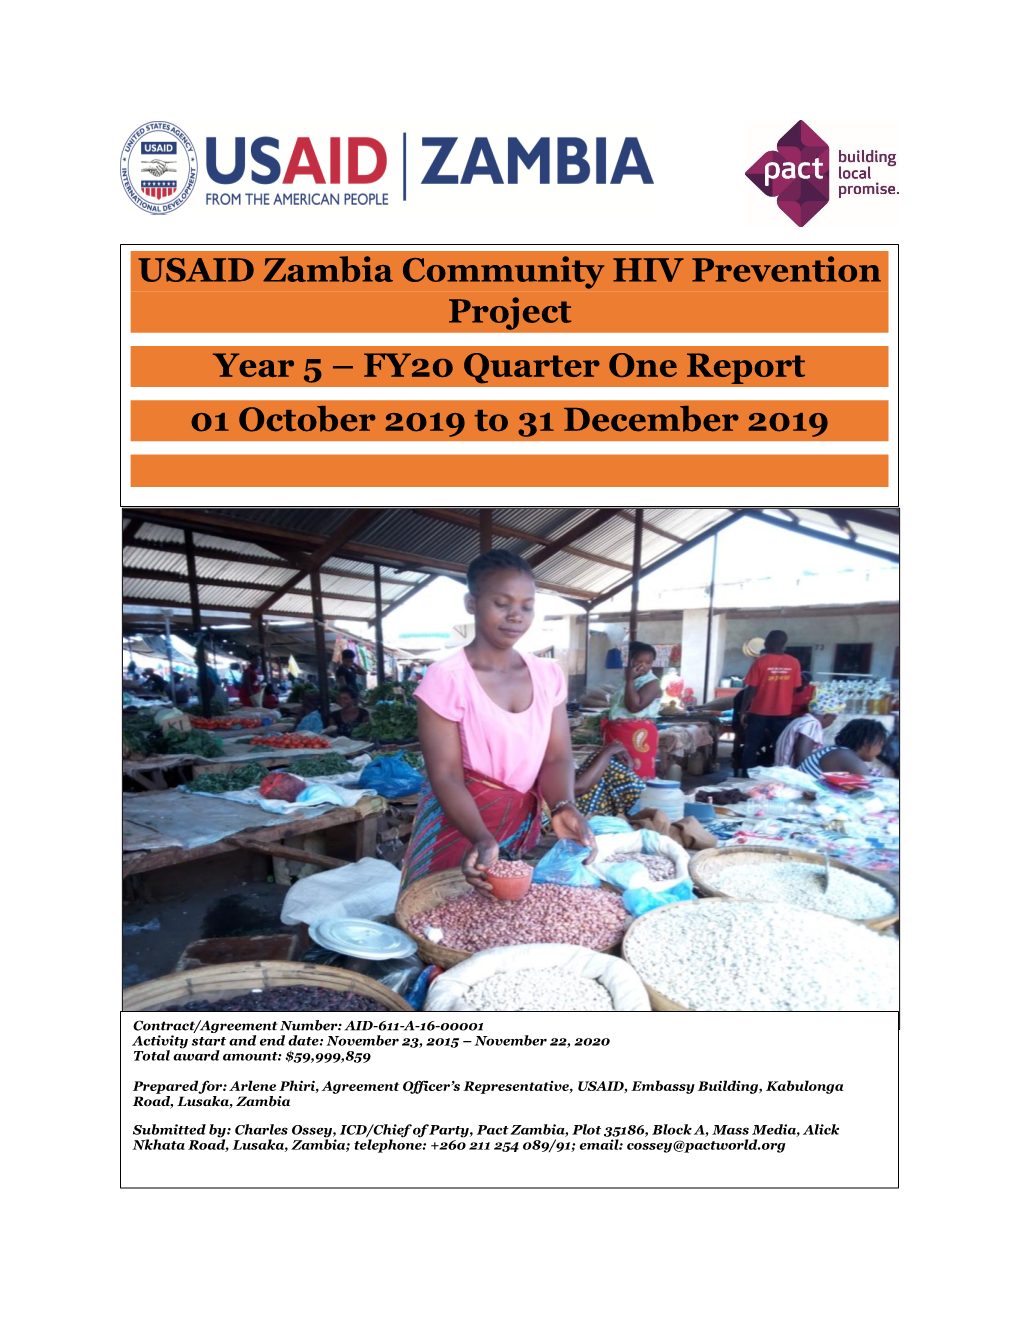 USAID Zambia Community HIV Prevention Project Year 5 – FY20